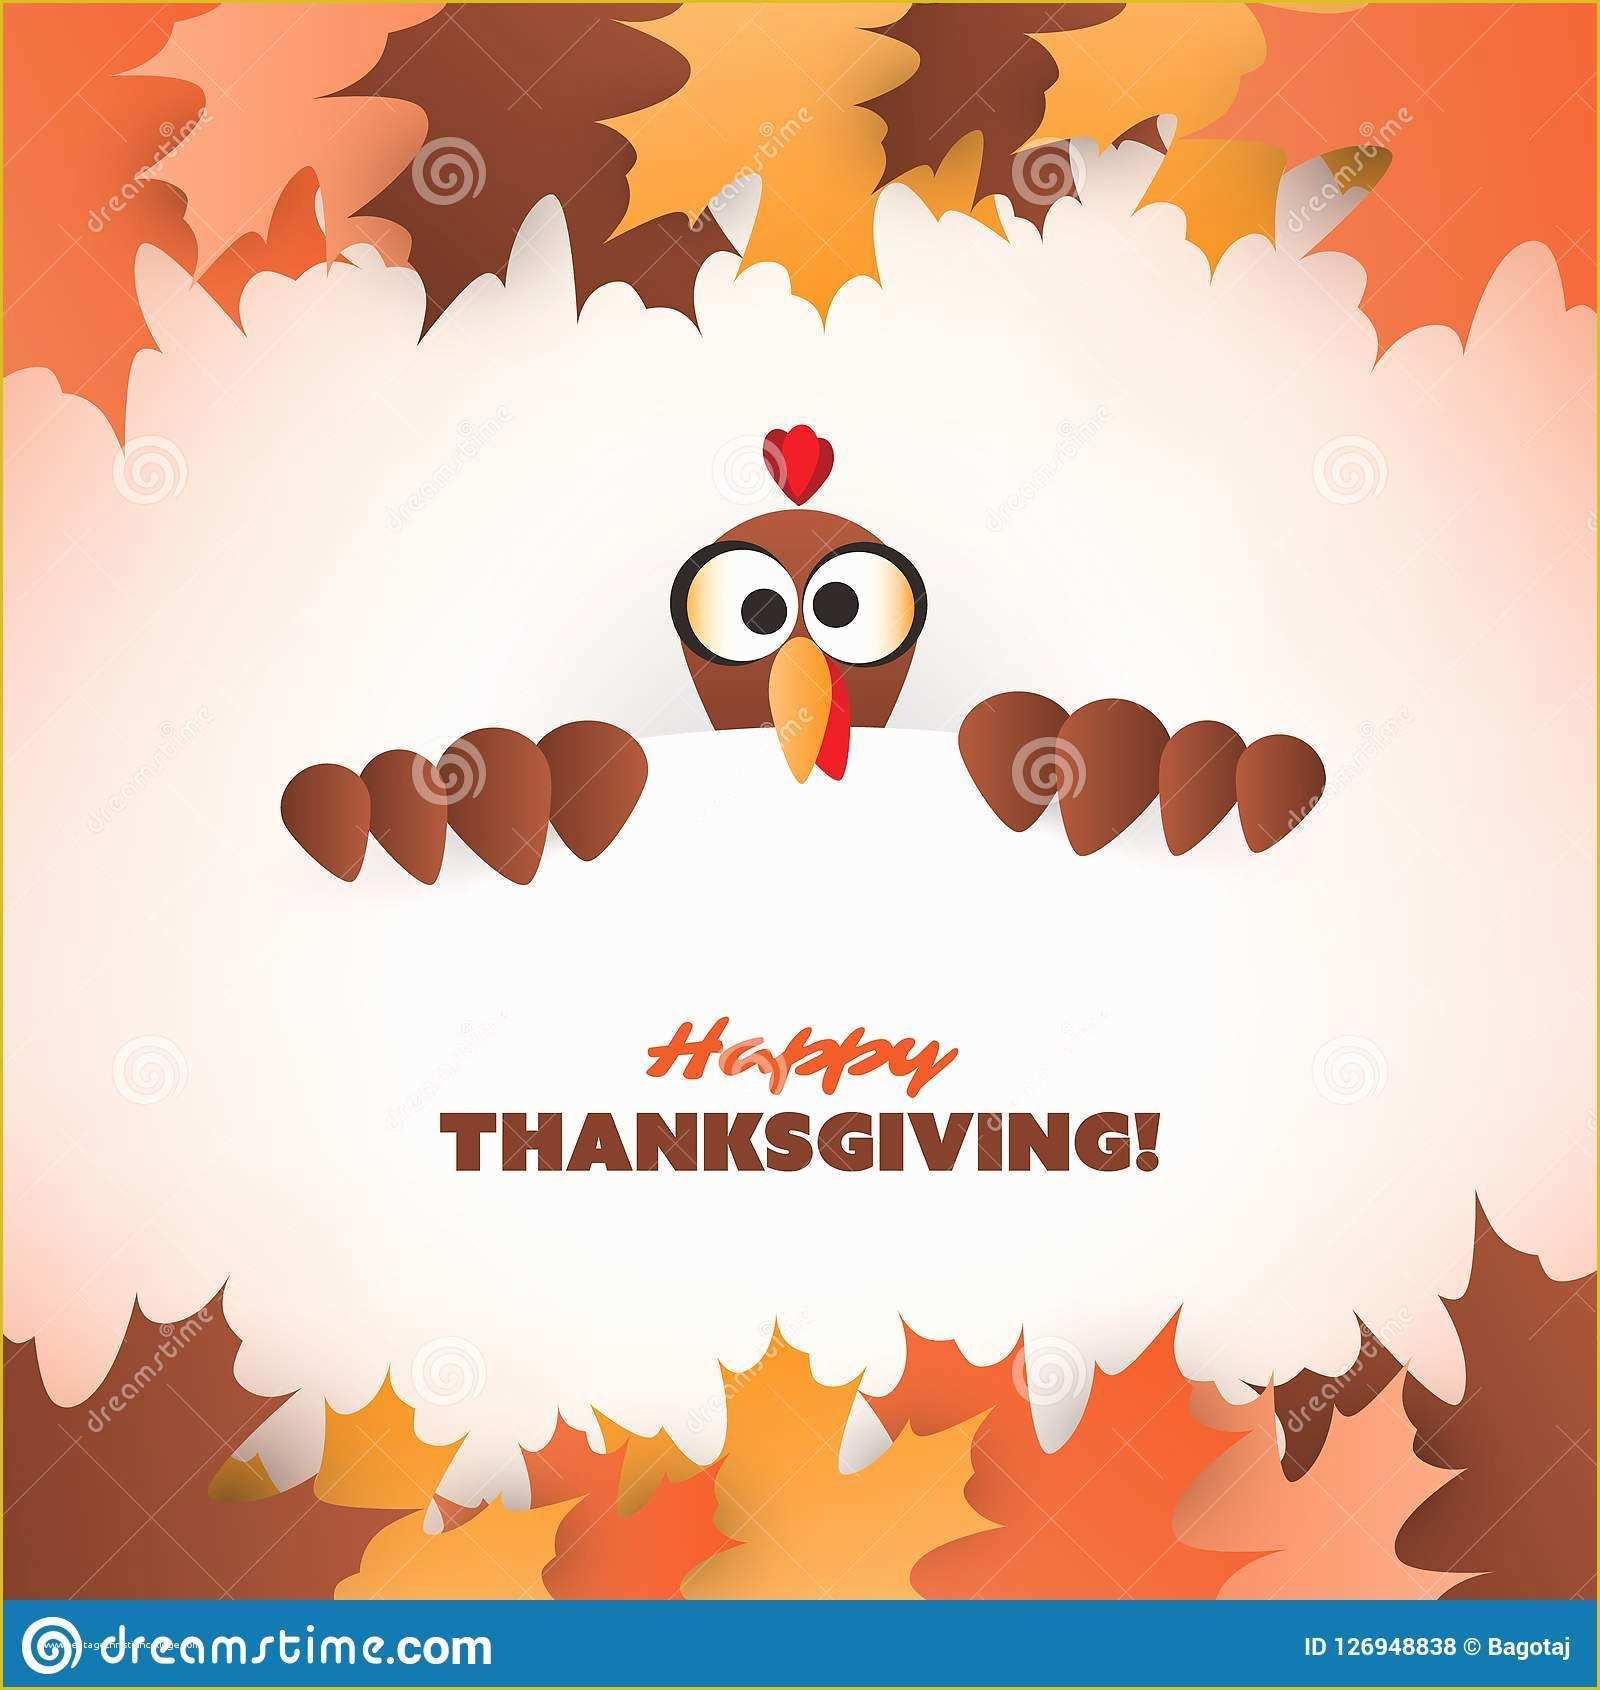 Thanksgiving Card Template Free Of Happy Thanksgiving Card Design Template Stock Vector